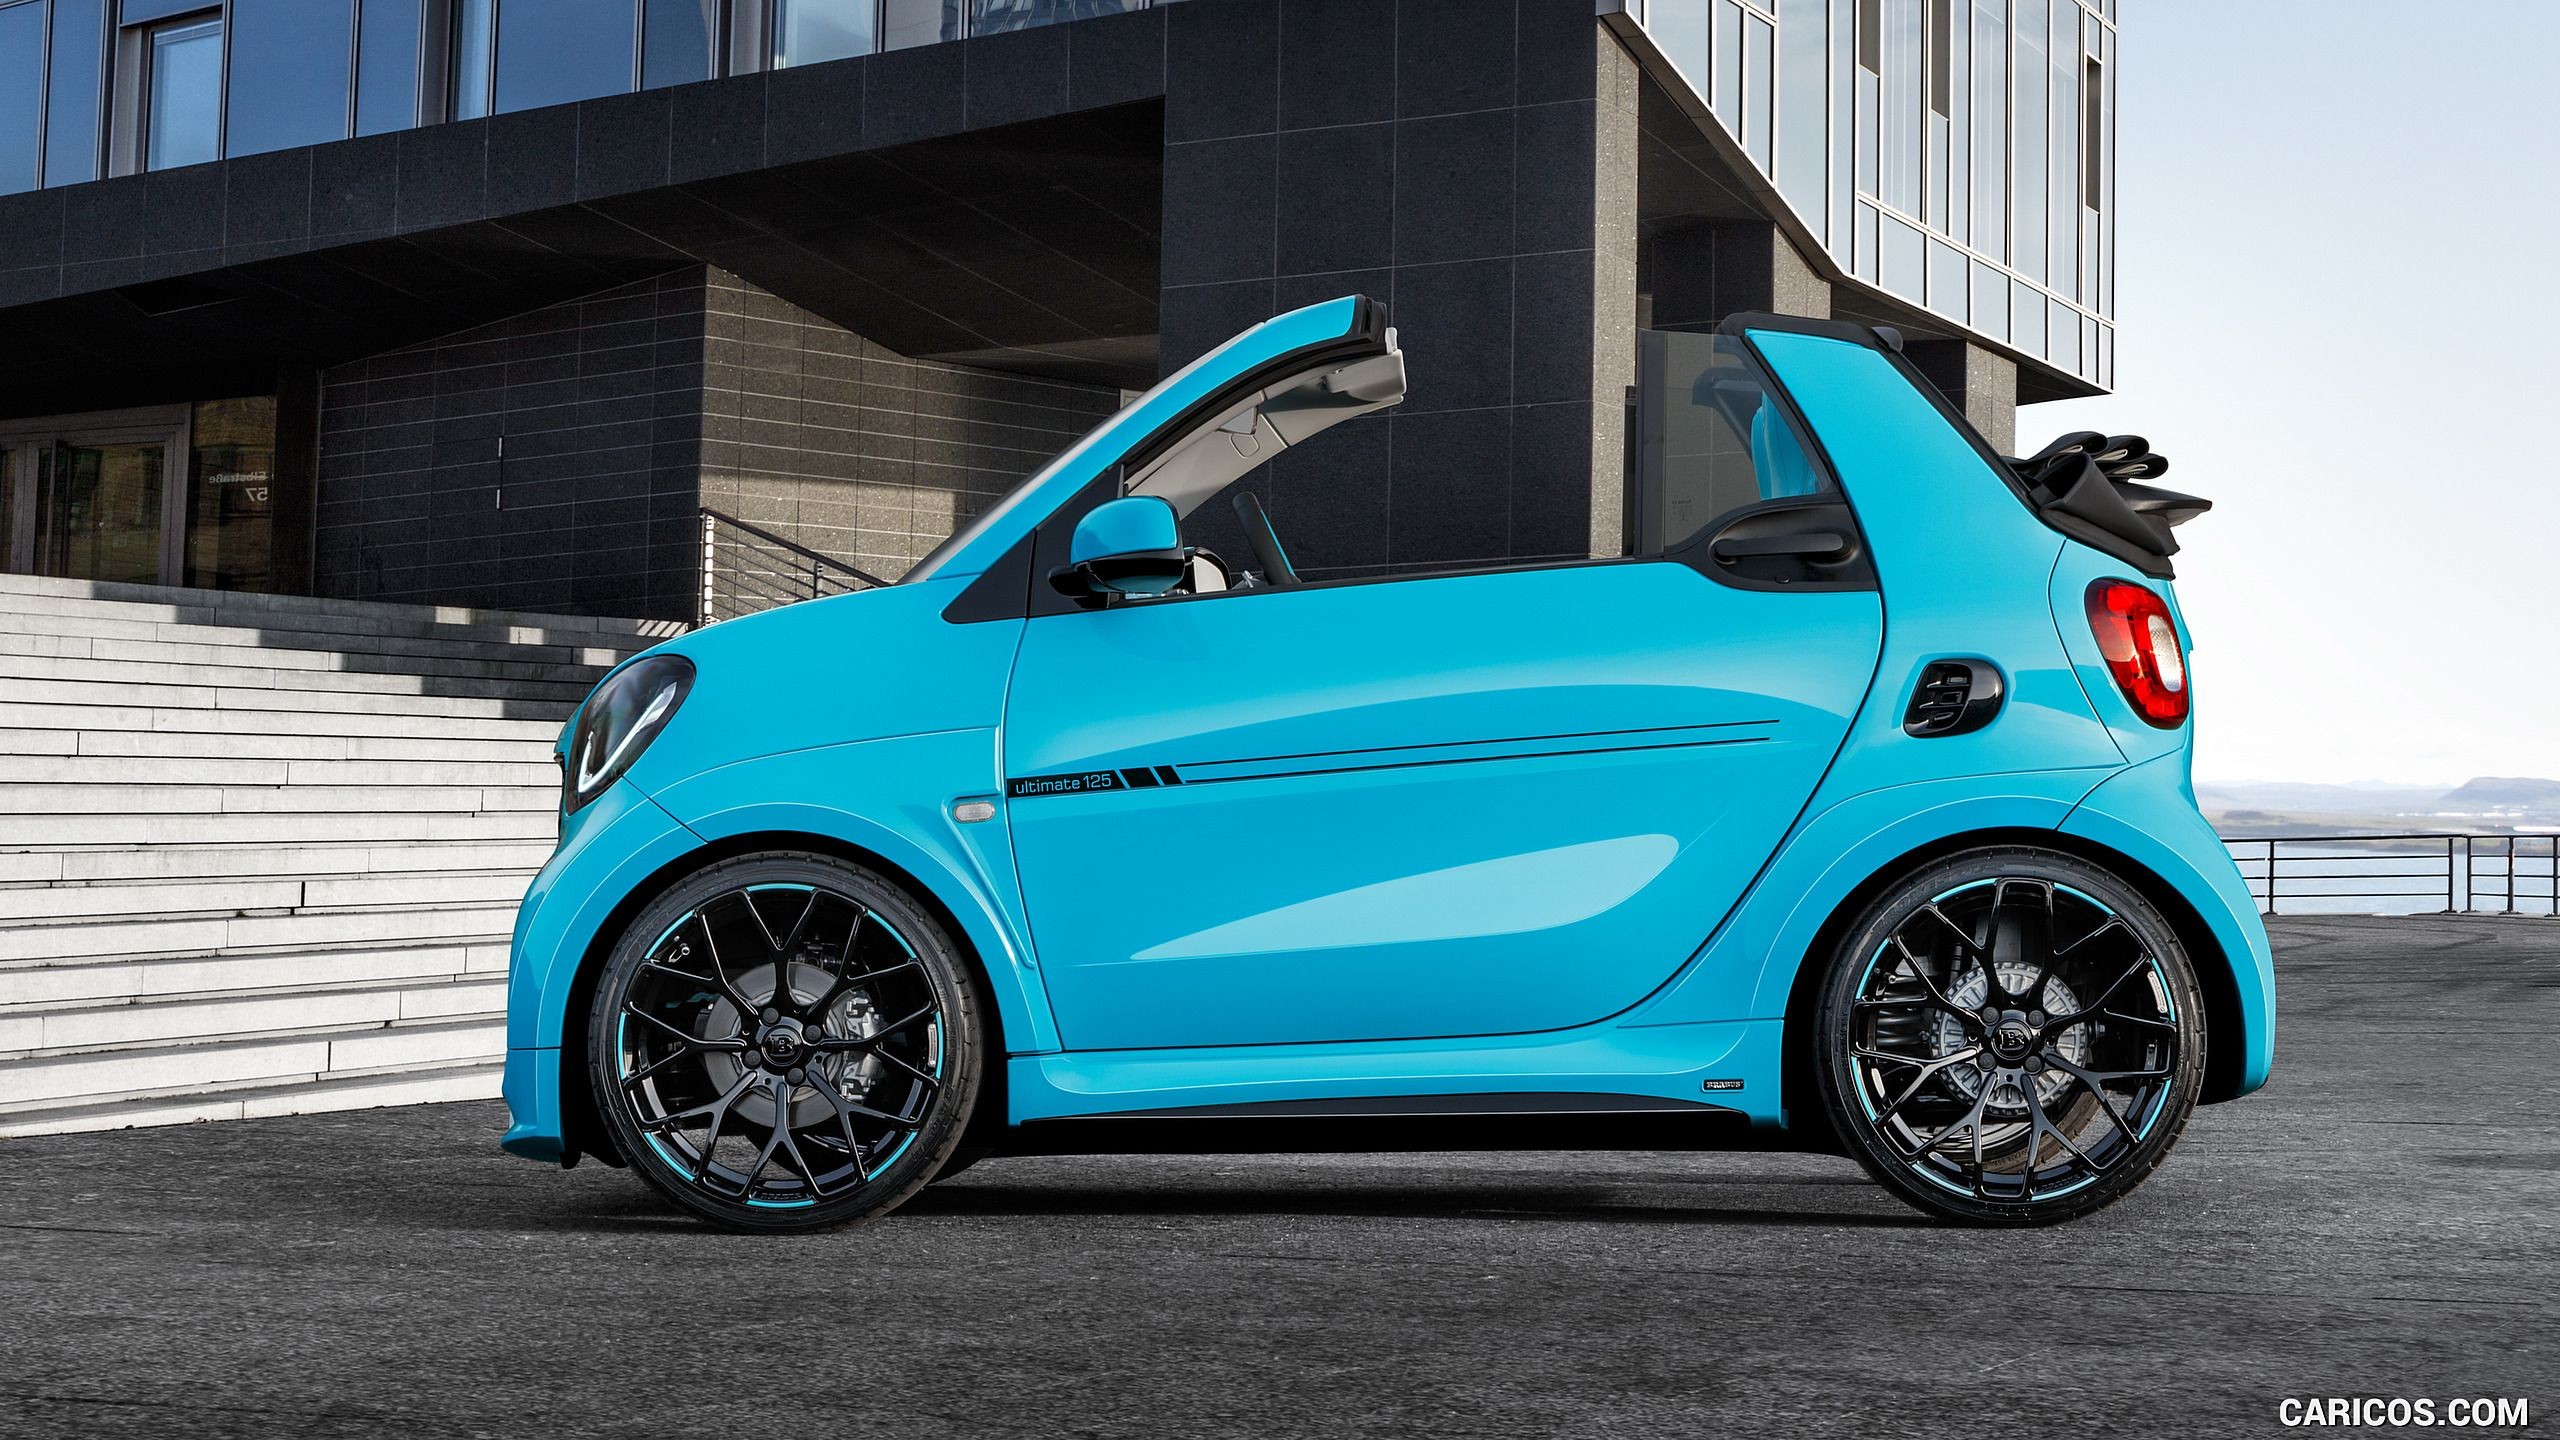 2560x1440 2017 BRABUS ULTIMATE 125 based on Smart ForTwo Cabrio Wallpaper